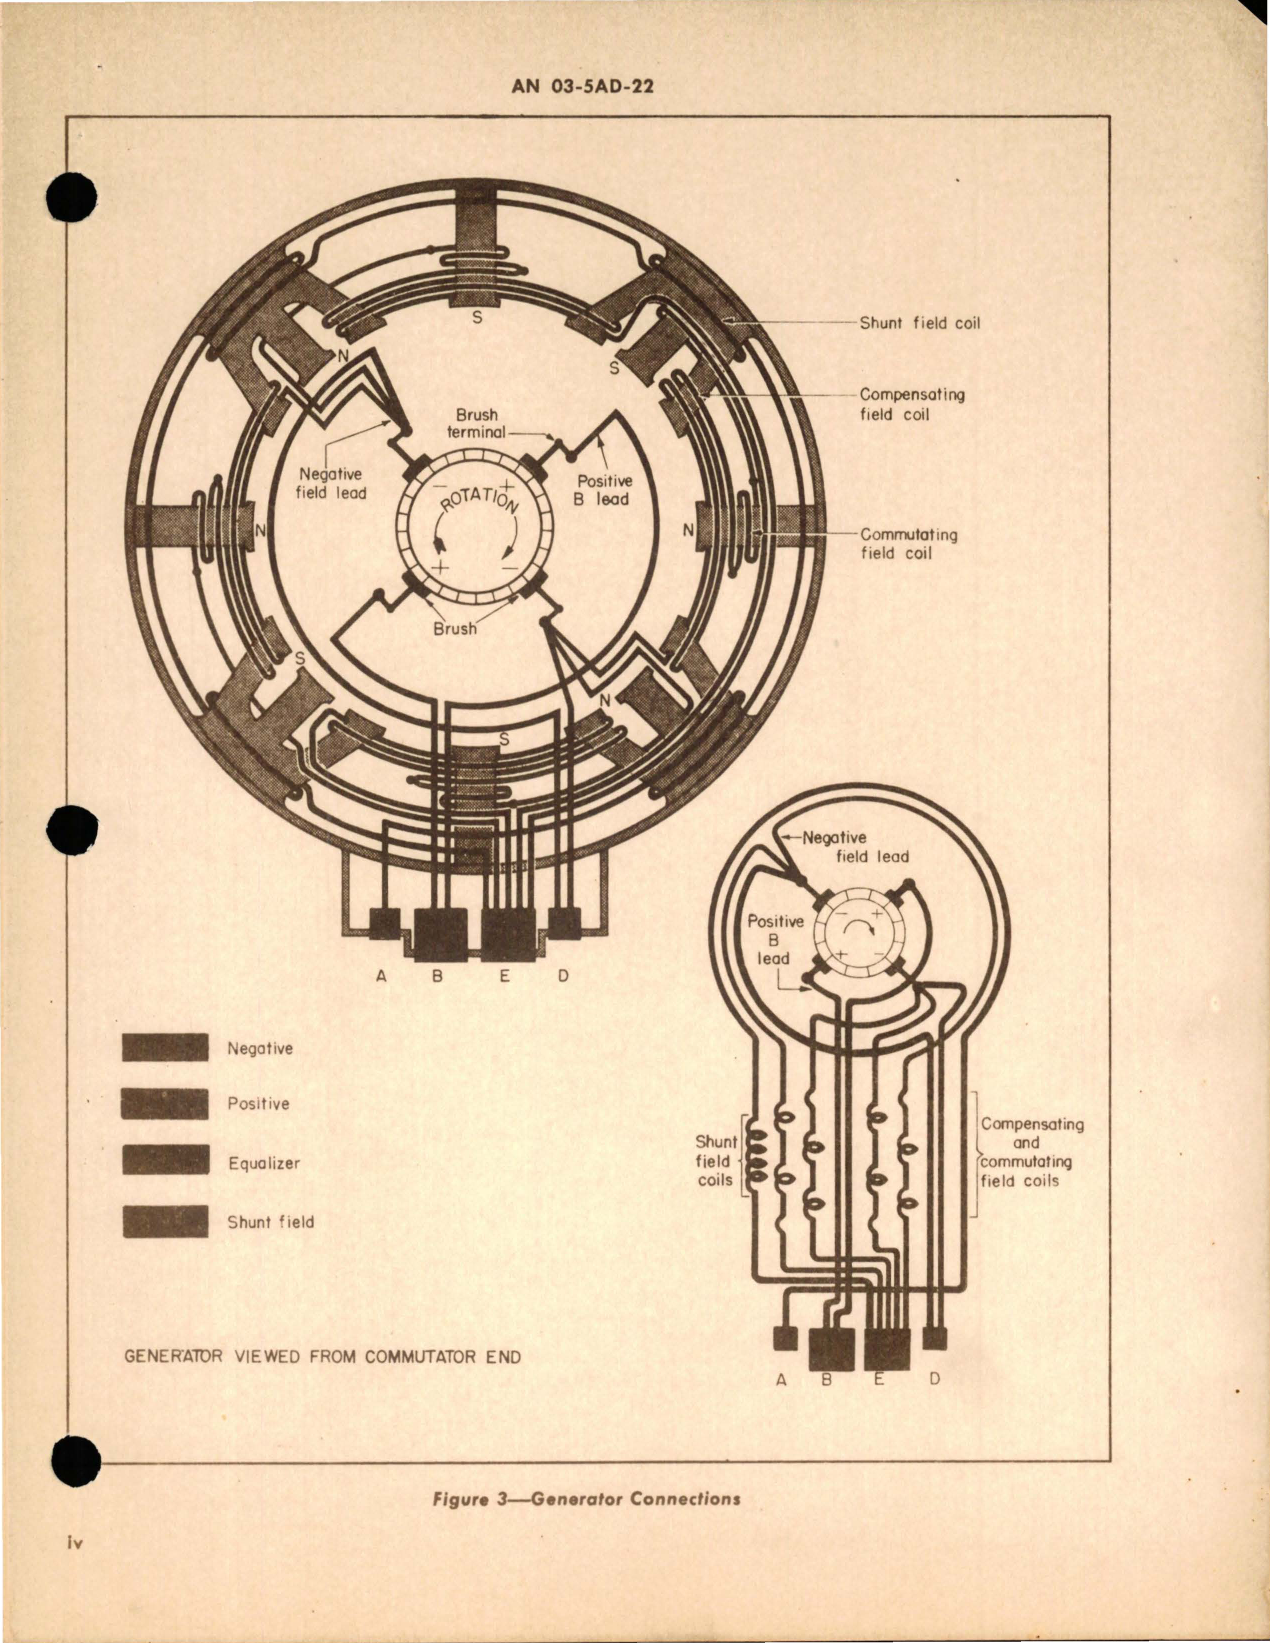 Sample page 8 from AirCorps Library document: Operation, Service, and Overhaul Instructions with Parts Catalog for Generators - Models 2CM73B7, 2CM73C1, and 2CM73C2